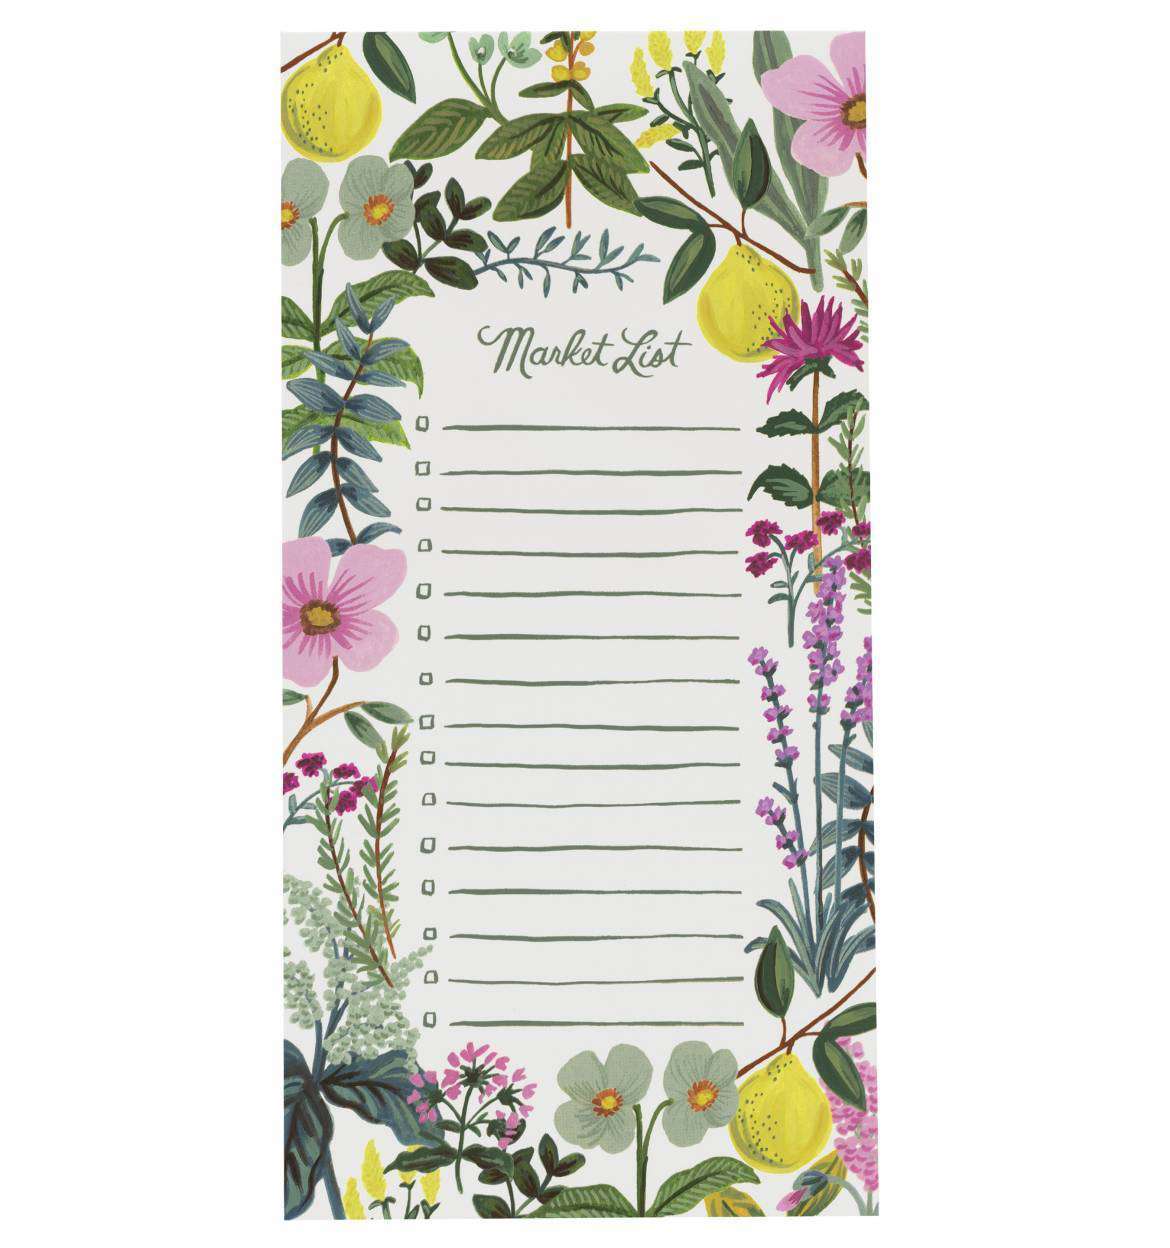 Multi color floral market list with attachable magnet